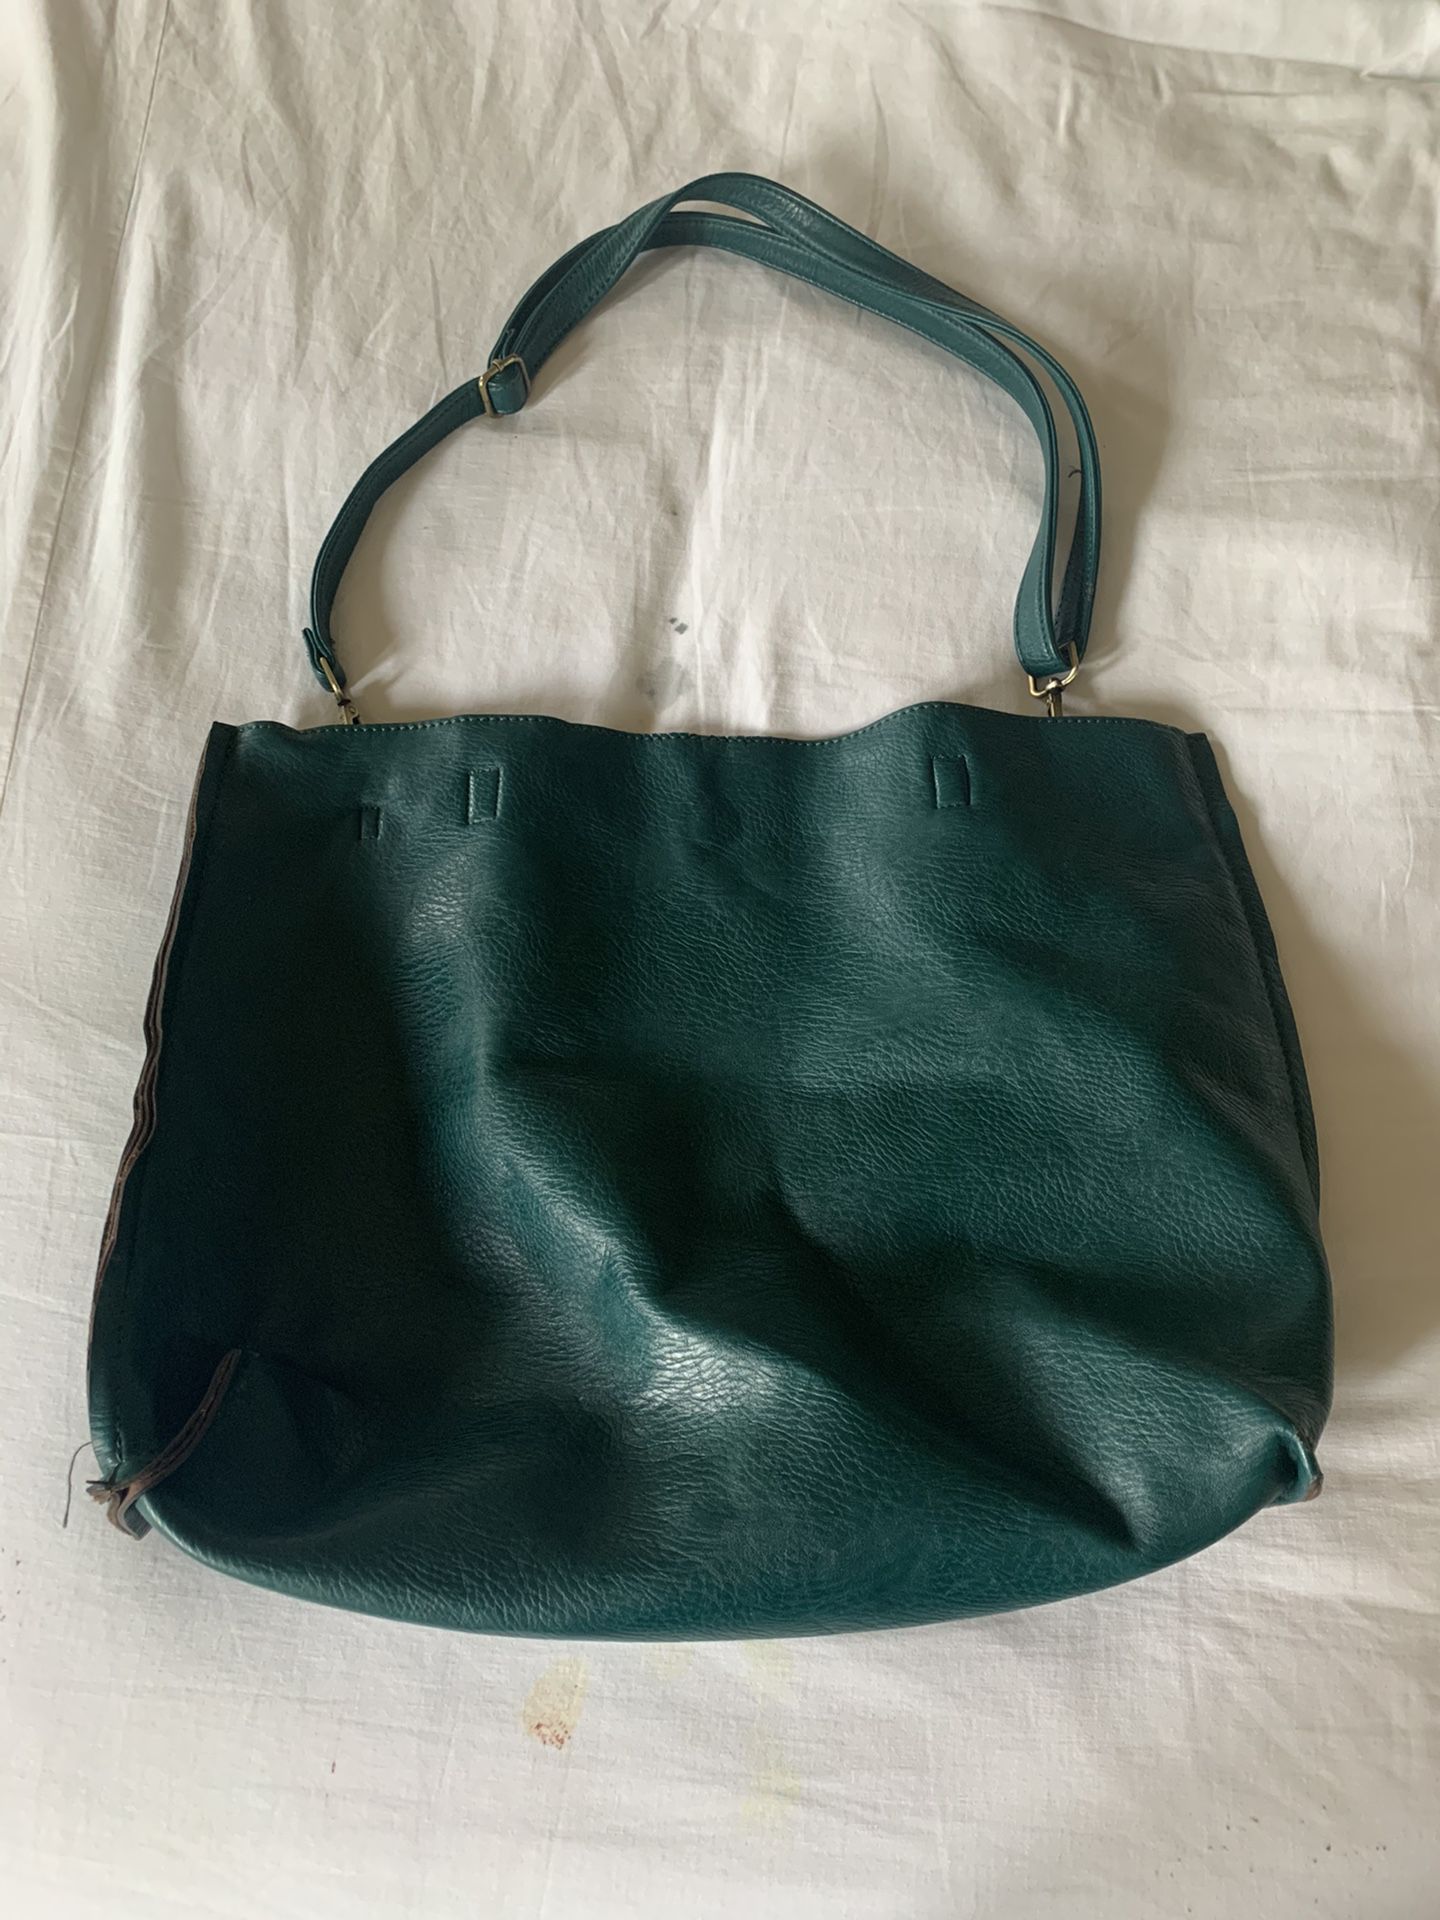 Teal Faux Leather Purse